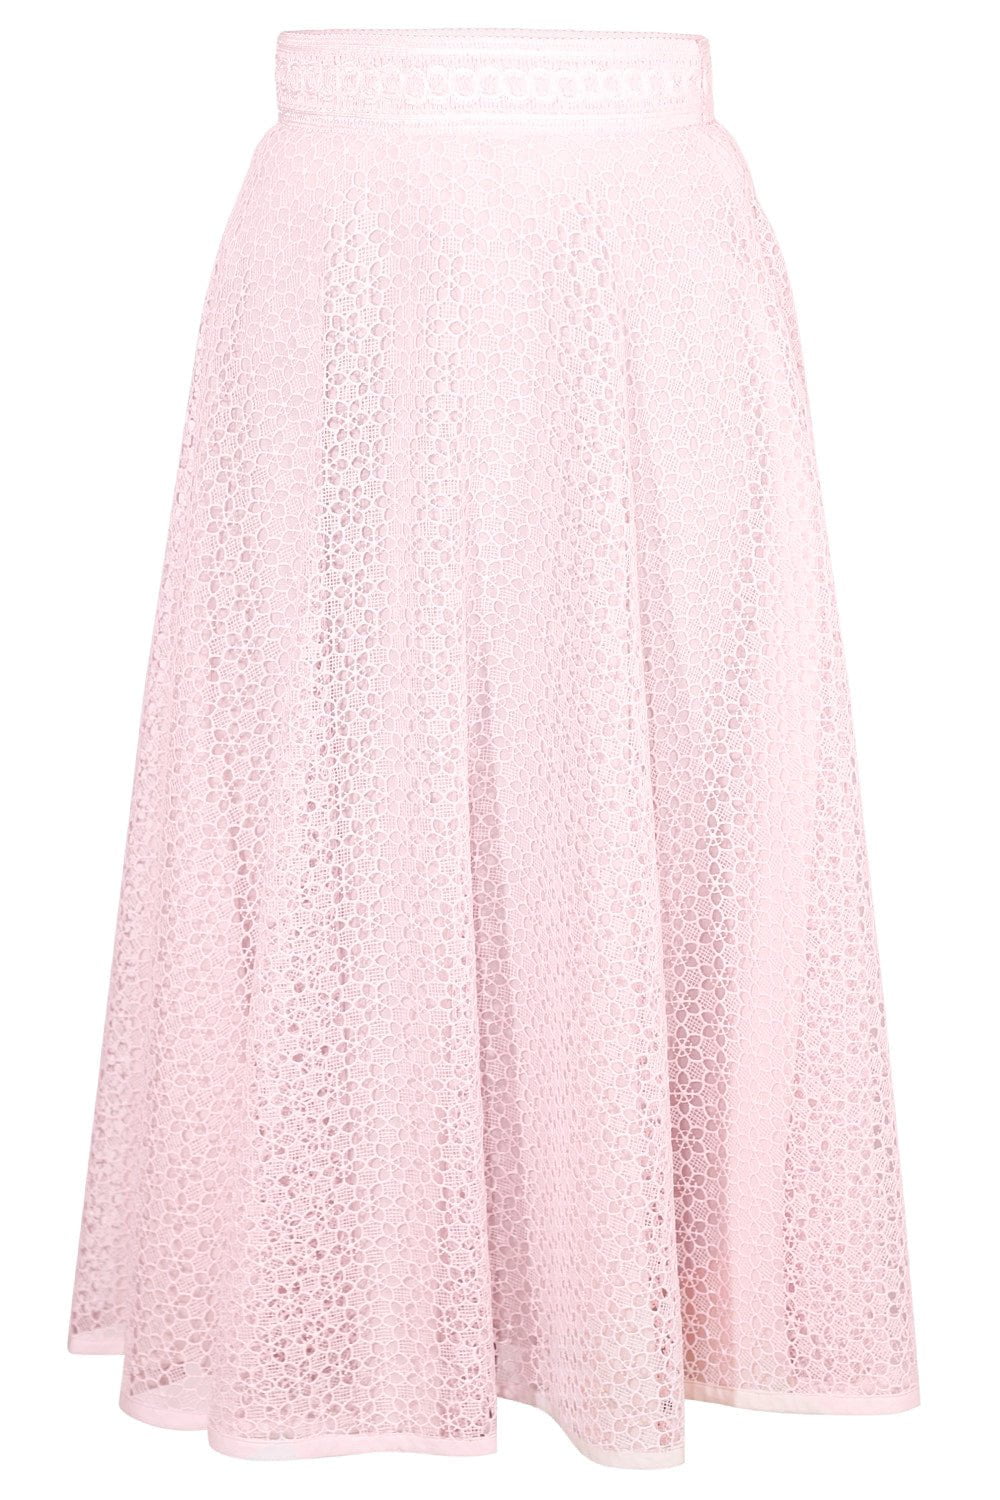 GIAMBATTISTA VALLI-Floral Lace Skirt-CHMPAGNE ROSE